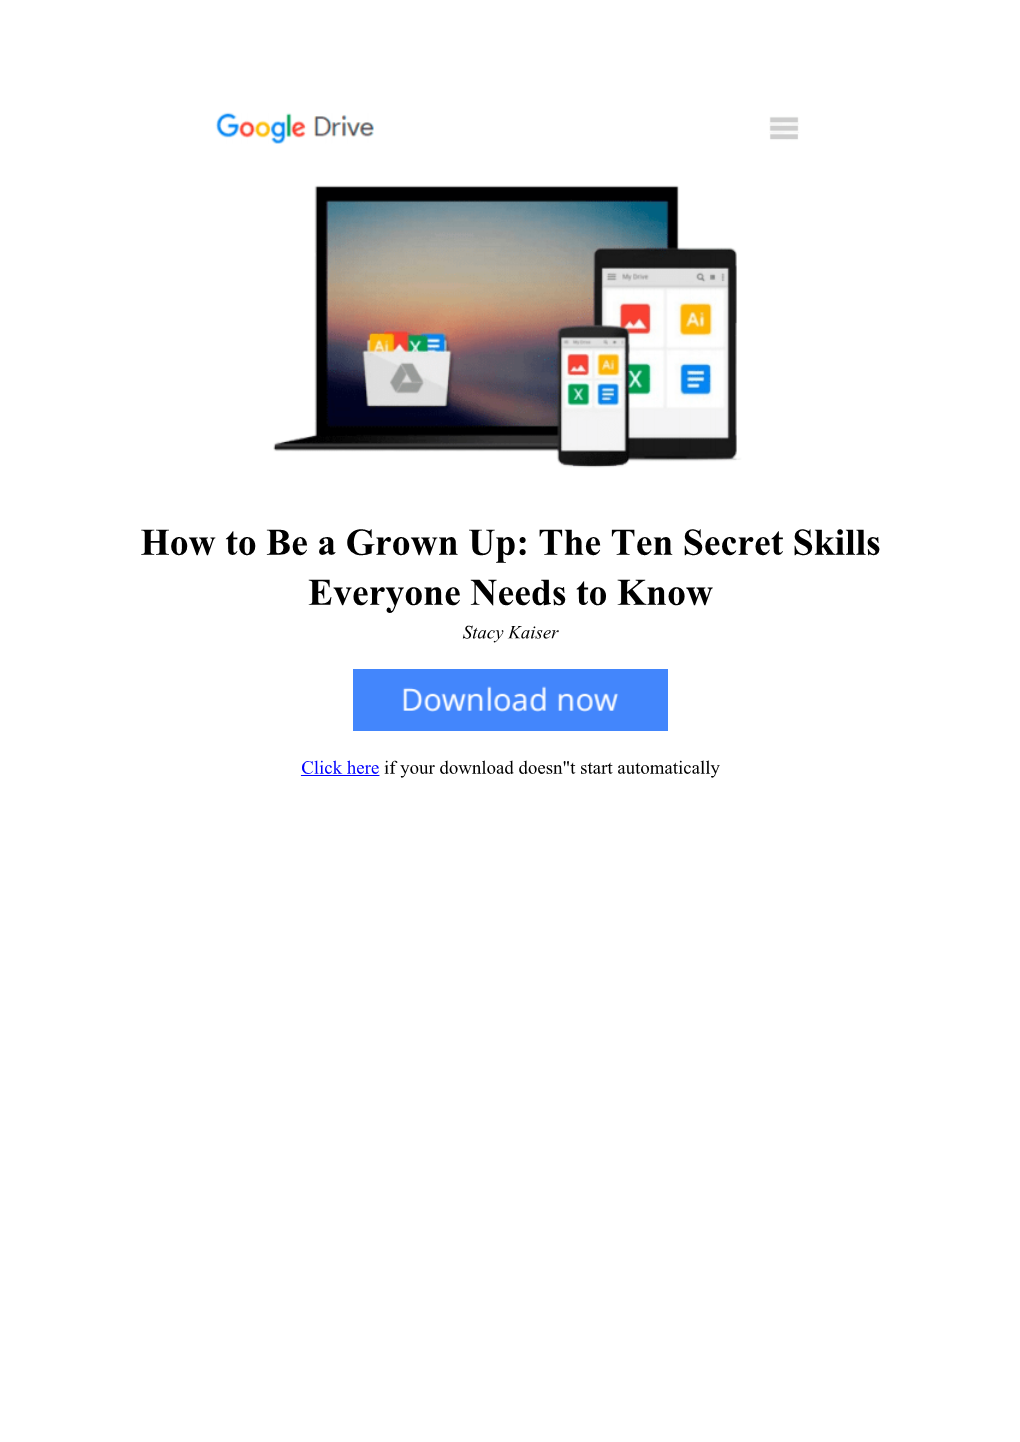 [UPAJ]⋙ How to Be a Grown Up: the Ten Secret Skills Everyone Needs to Know by Stacy Kaiser #8TI5PFNVDJZ #Free Read Online